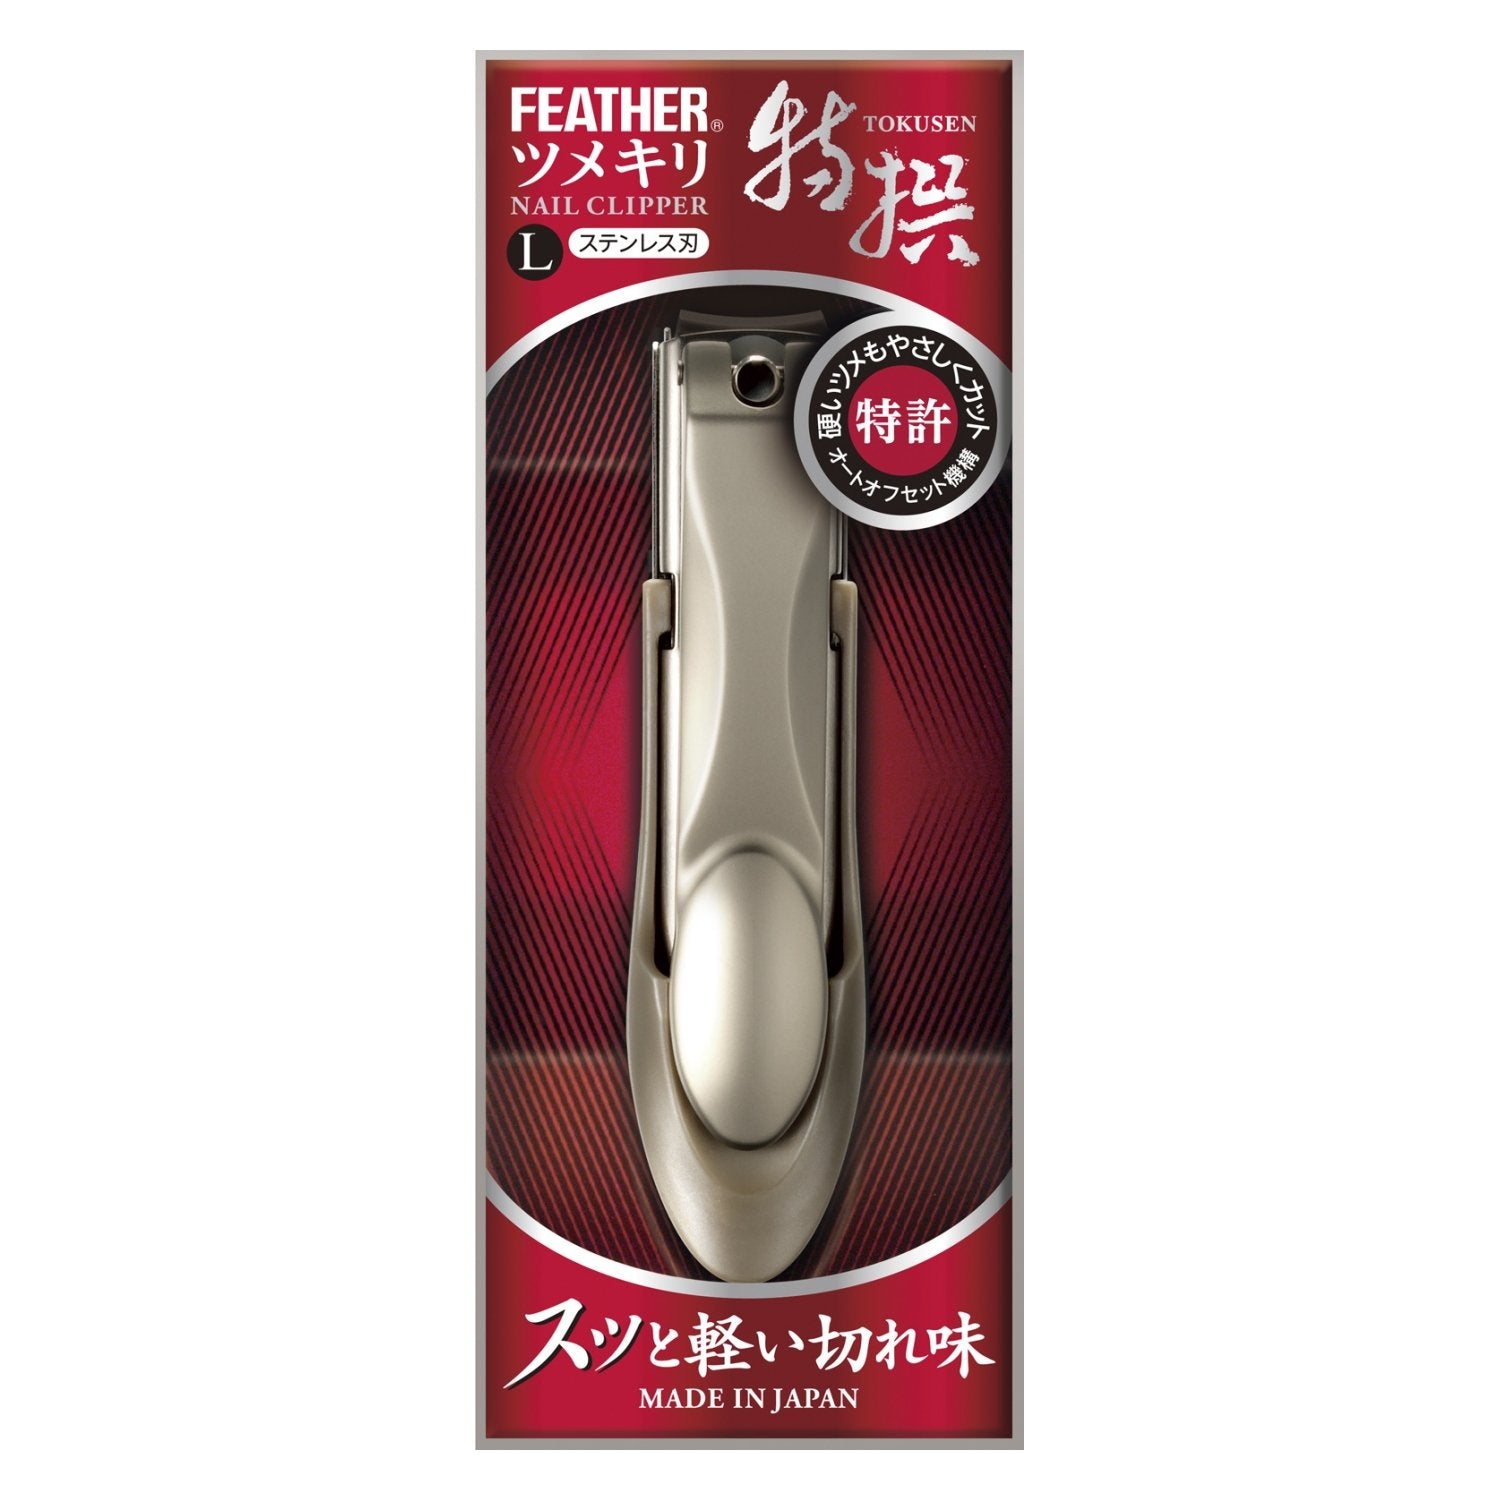 Feather Special Claw L - Premium Quality Safety Razor by Feather Brand